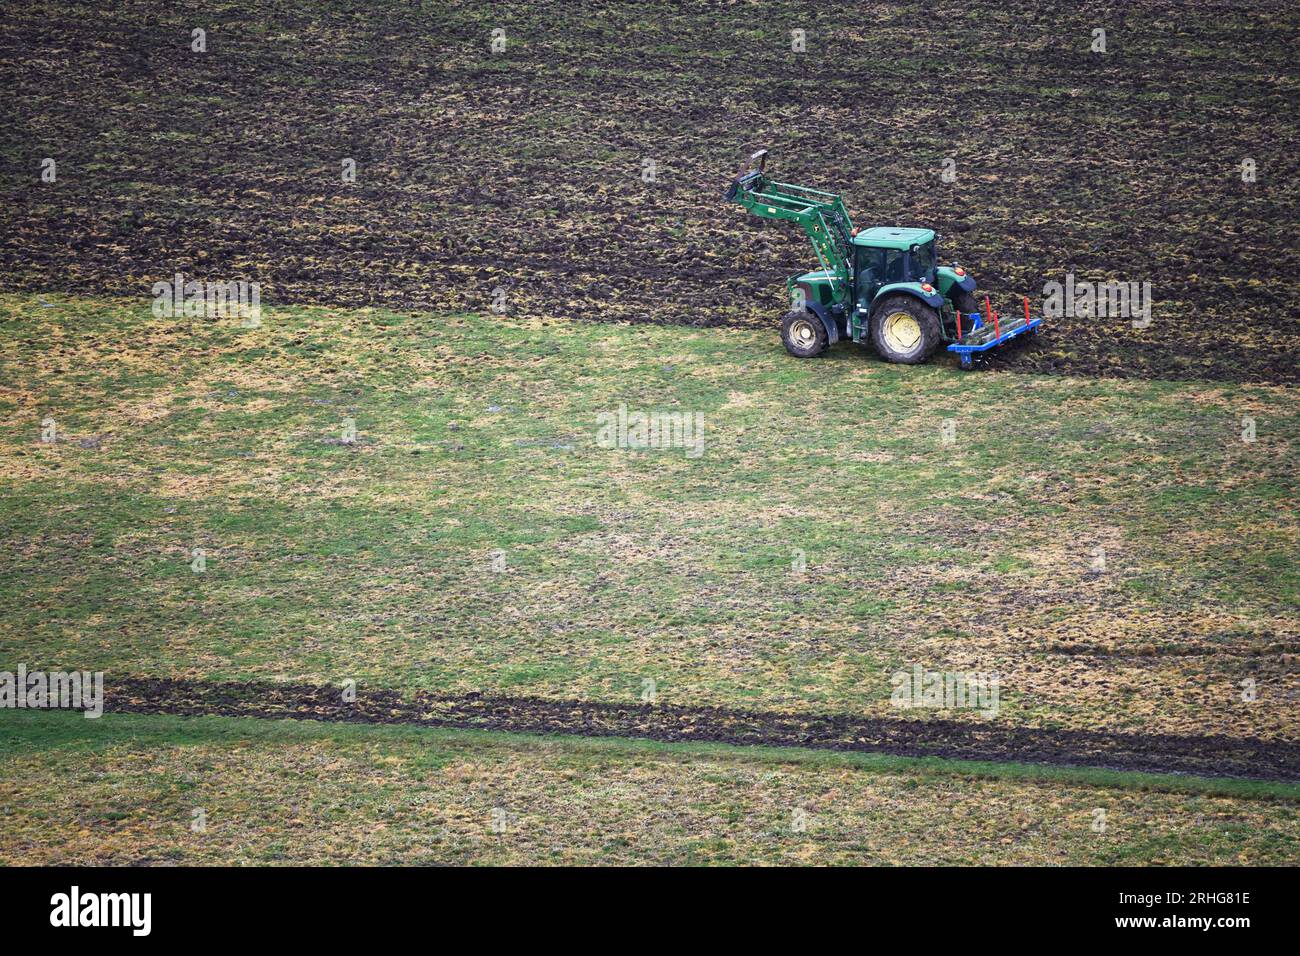 Green tractor plowing a field followed by a blue harrow, working the land efficiently. Stock Photo